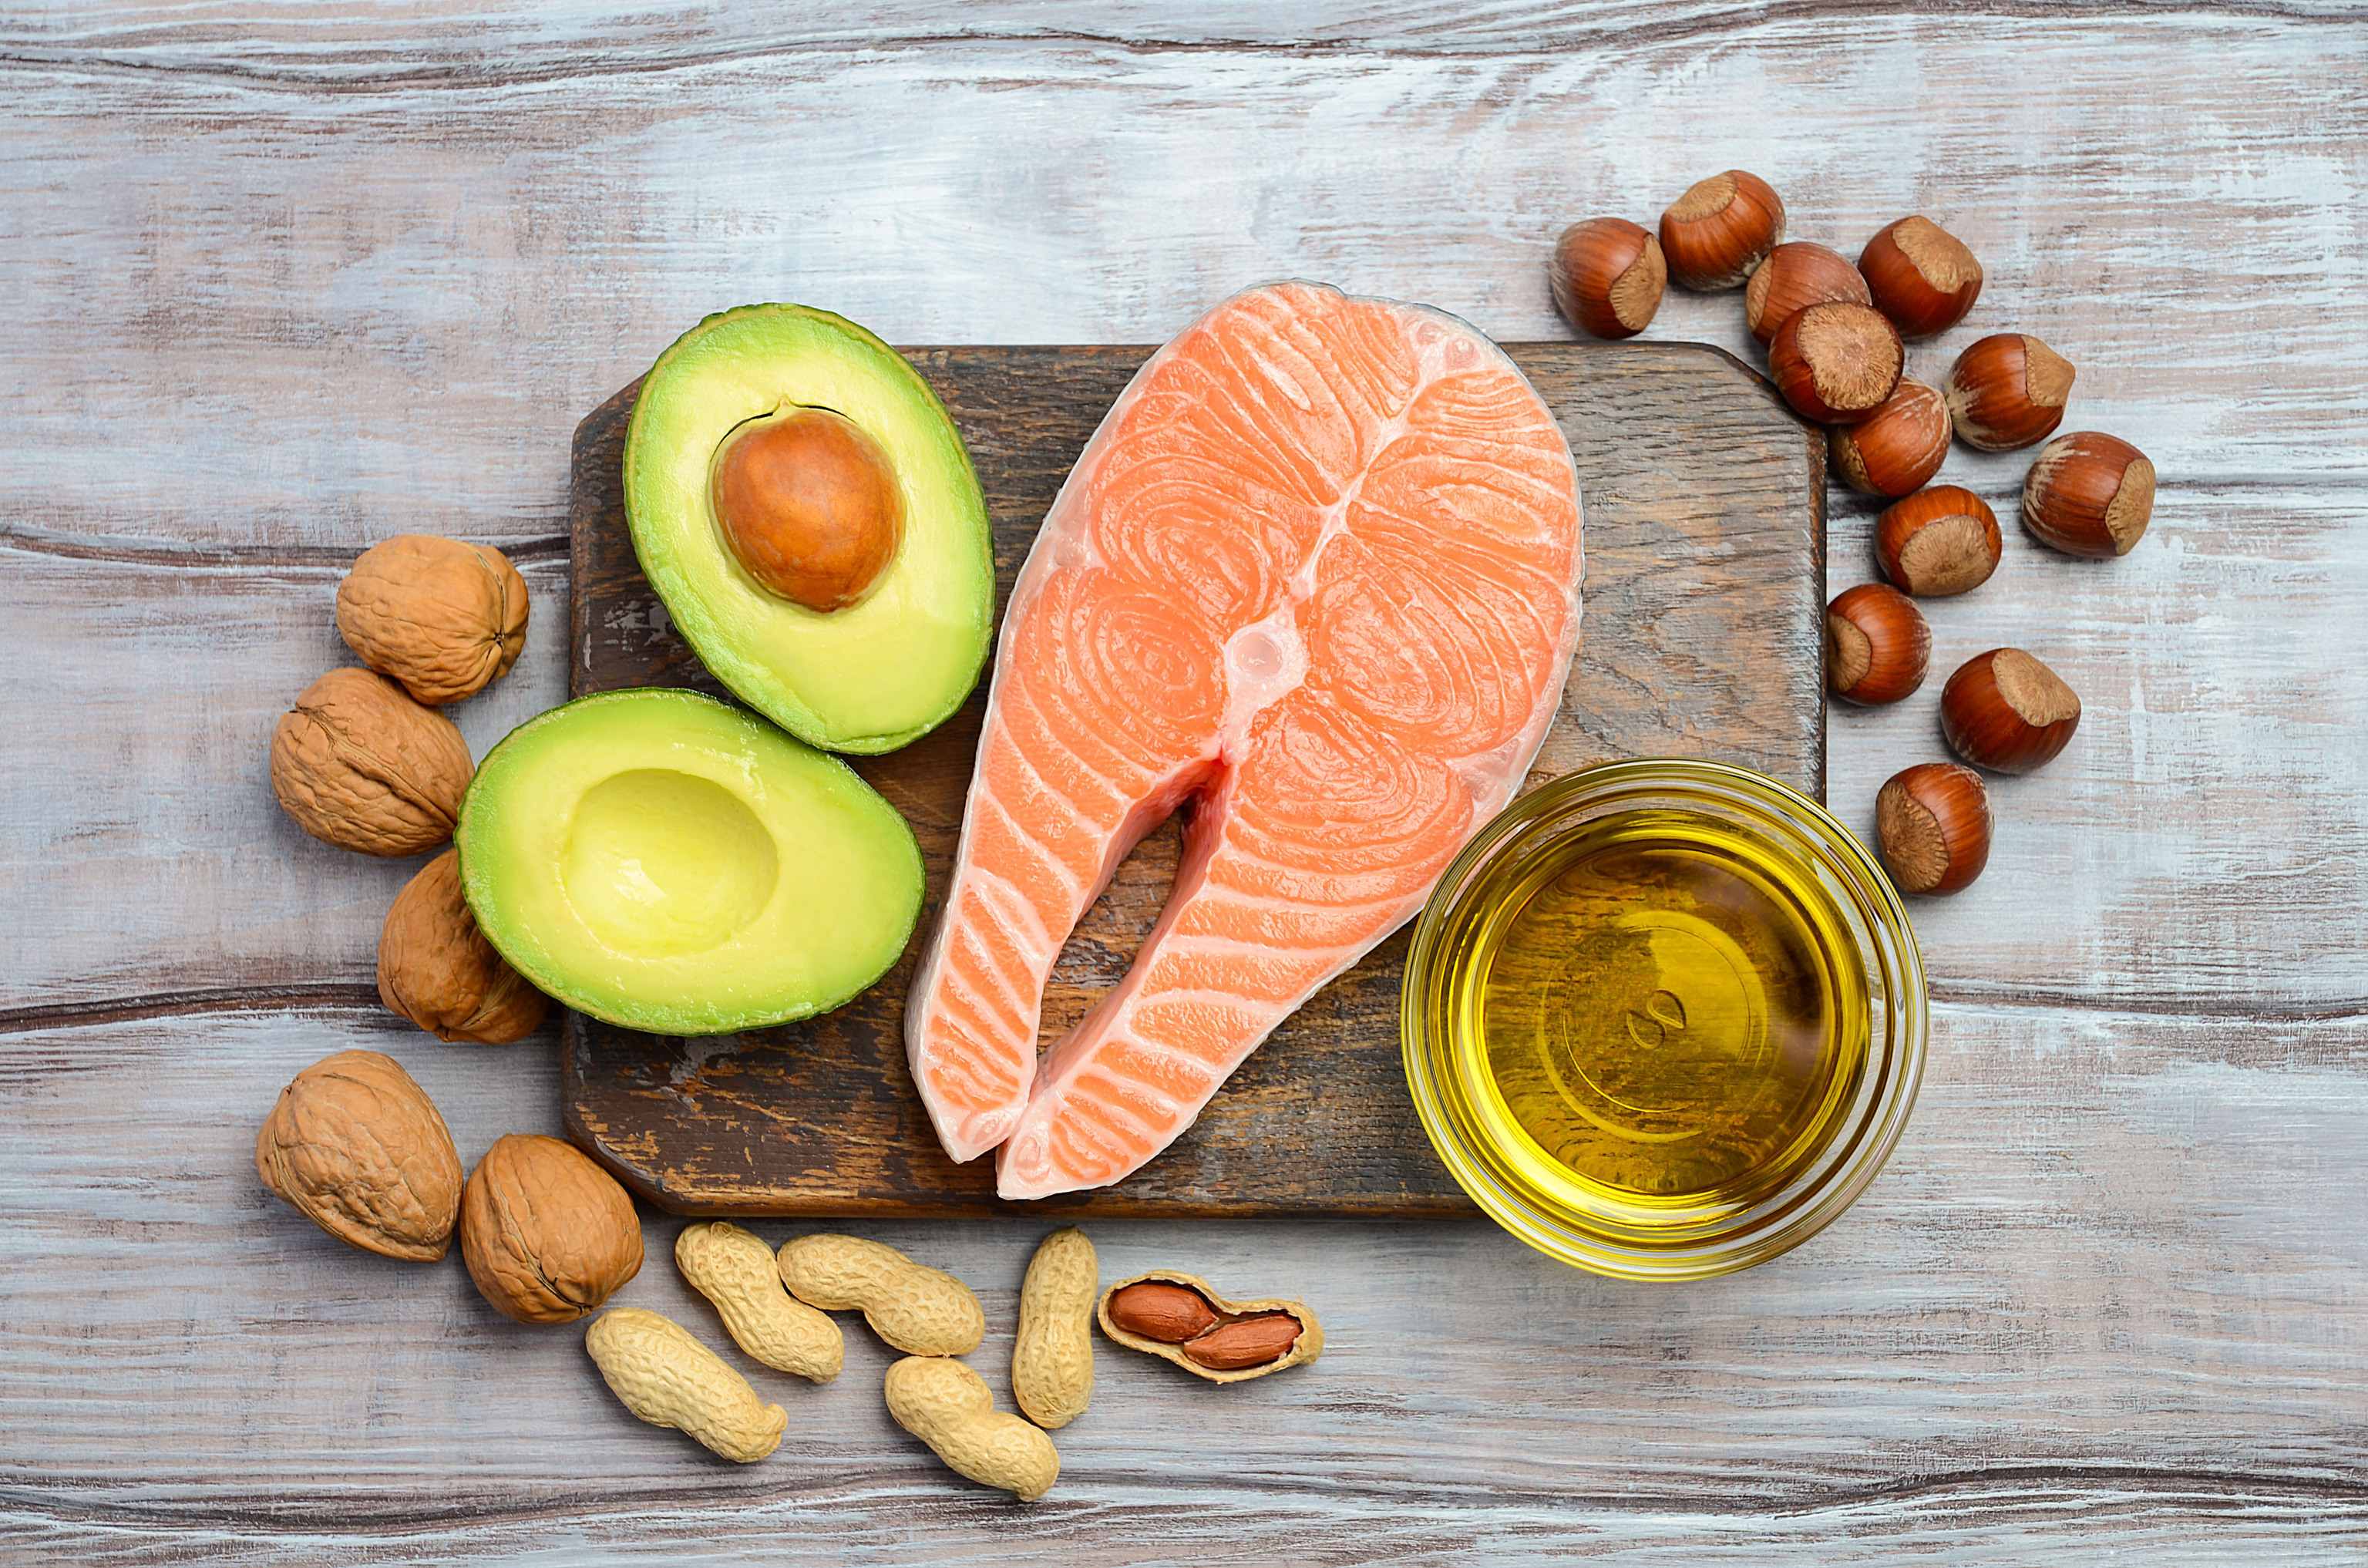 Examples of healthy or 'good' fats.